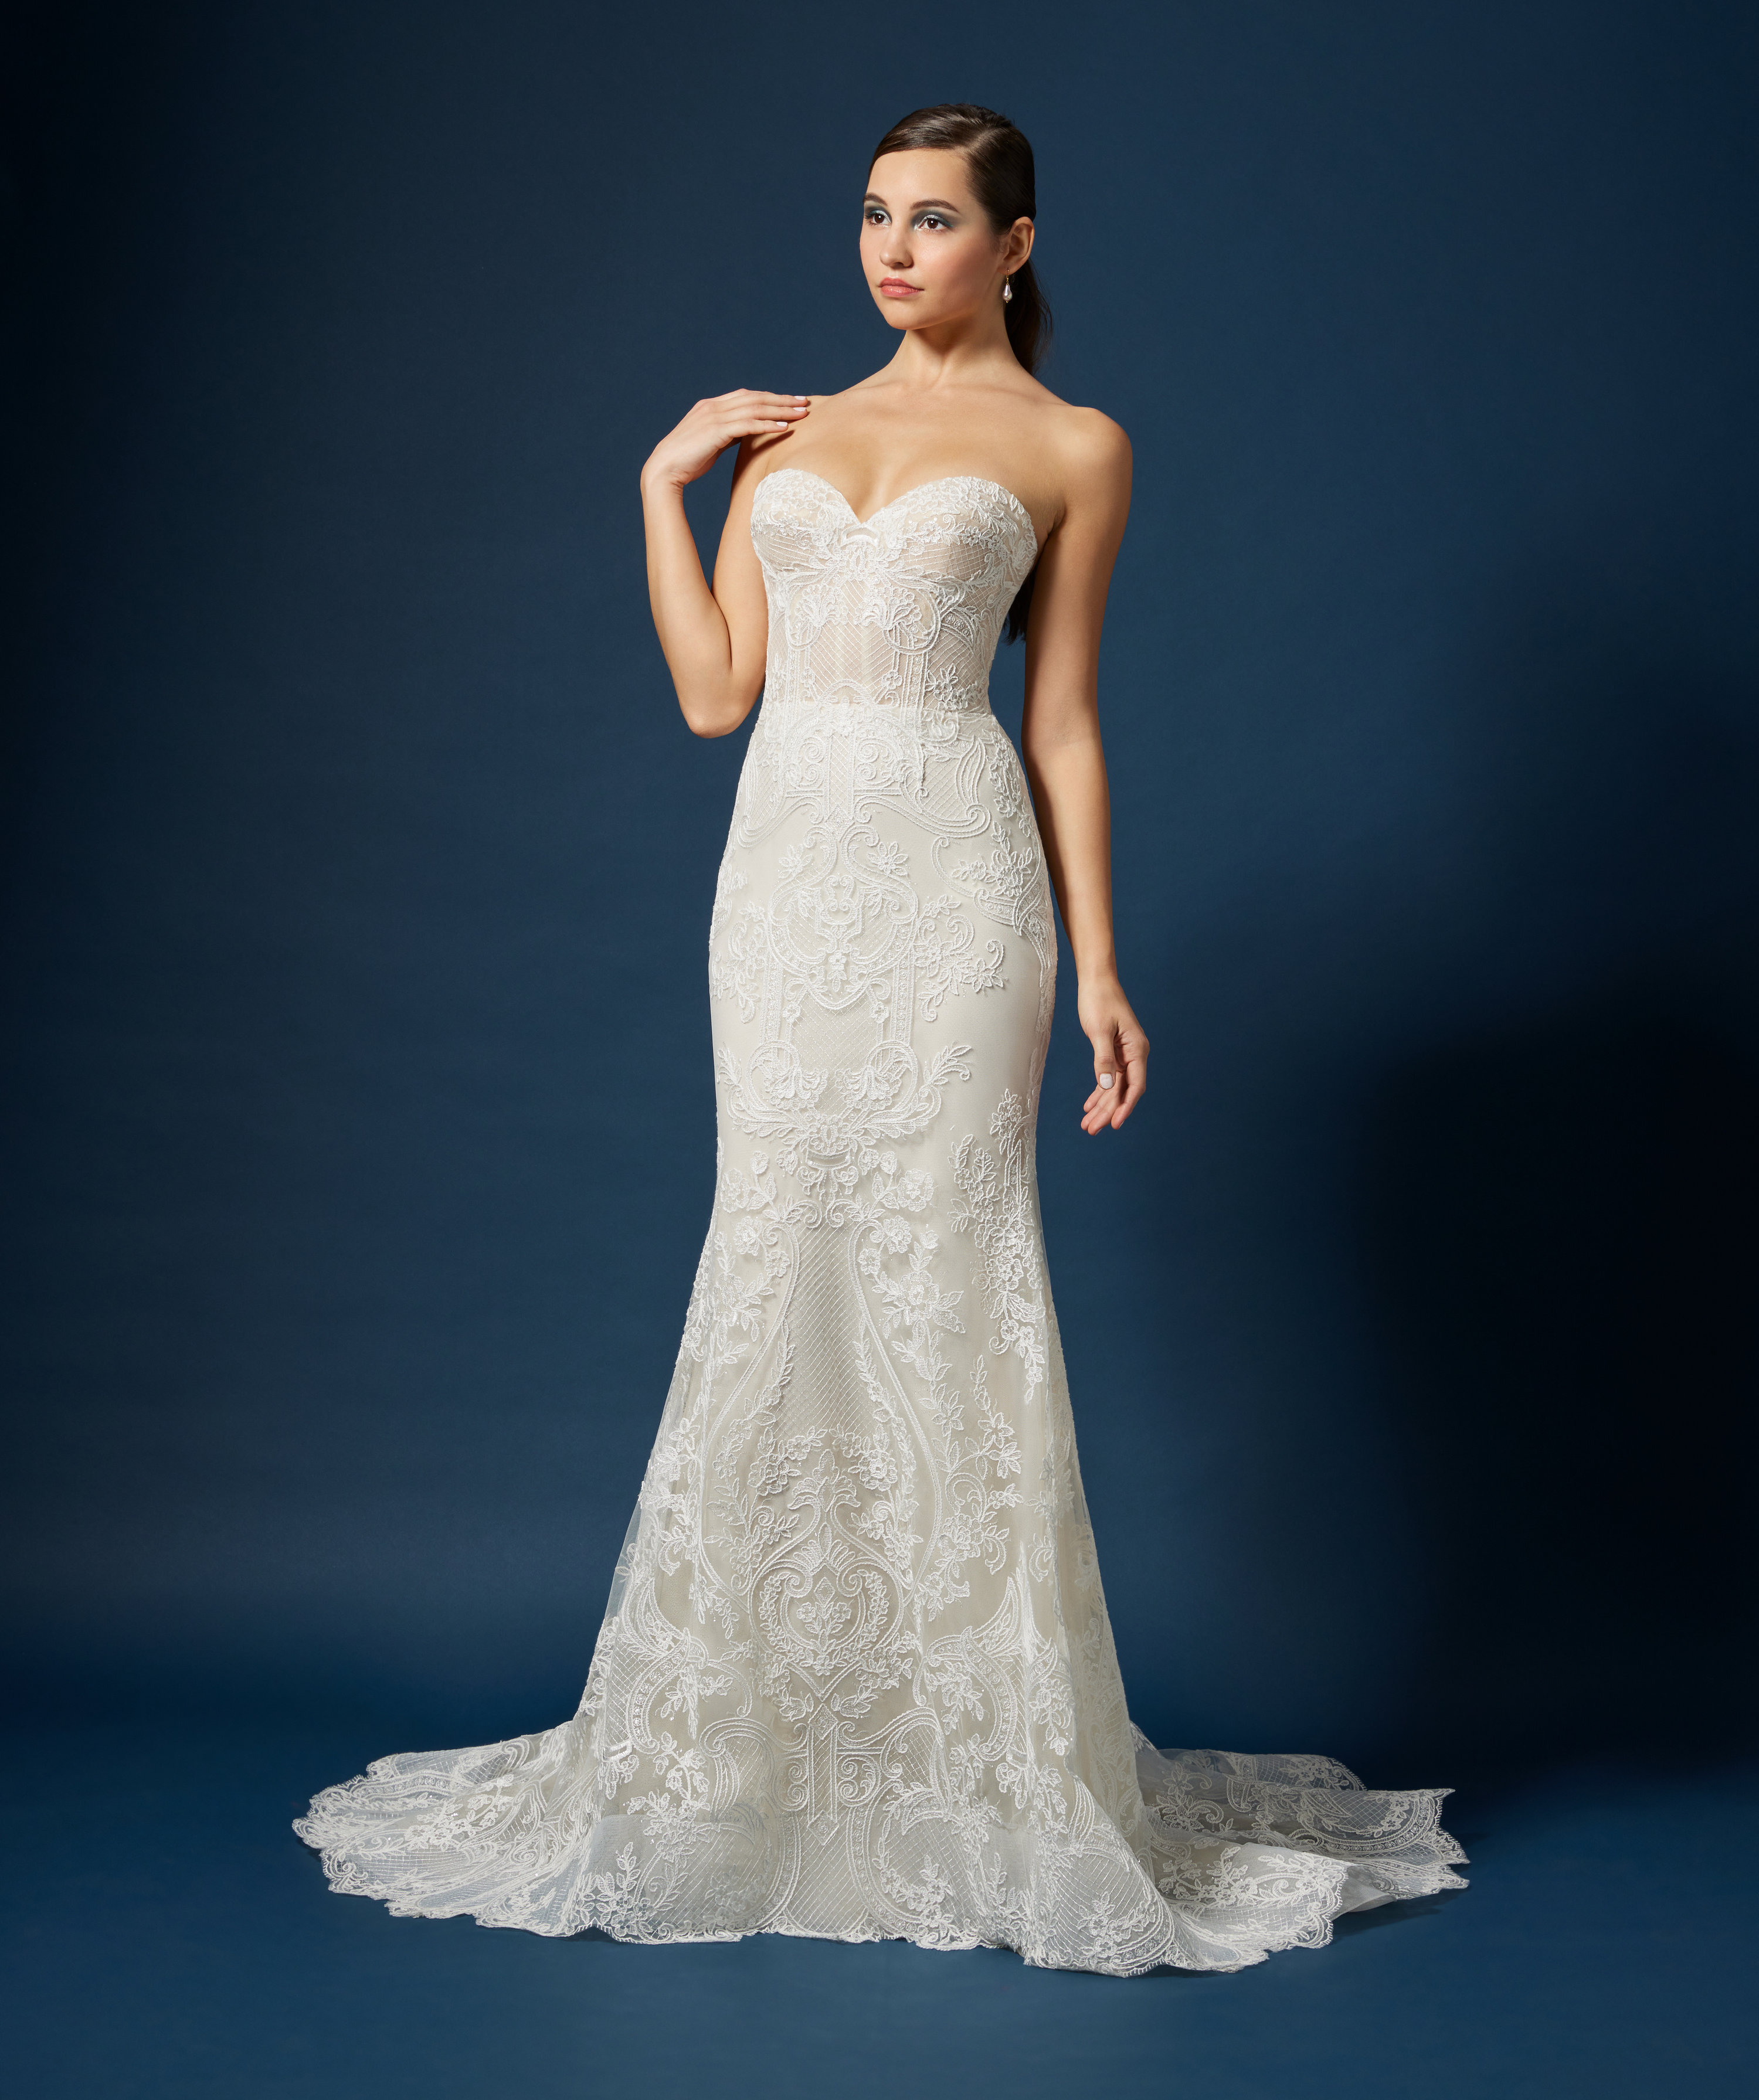 Bridal Gowns and Wedding Dresses by JLM Couture - Style 32303 Hepburn